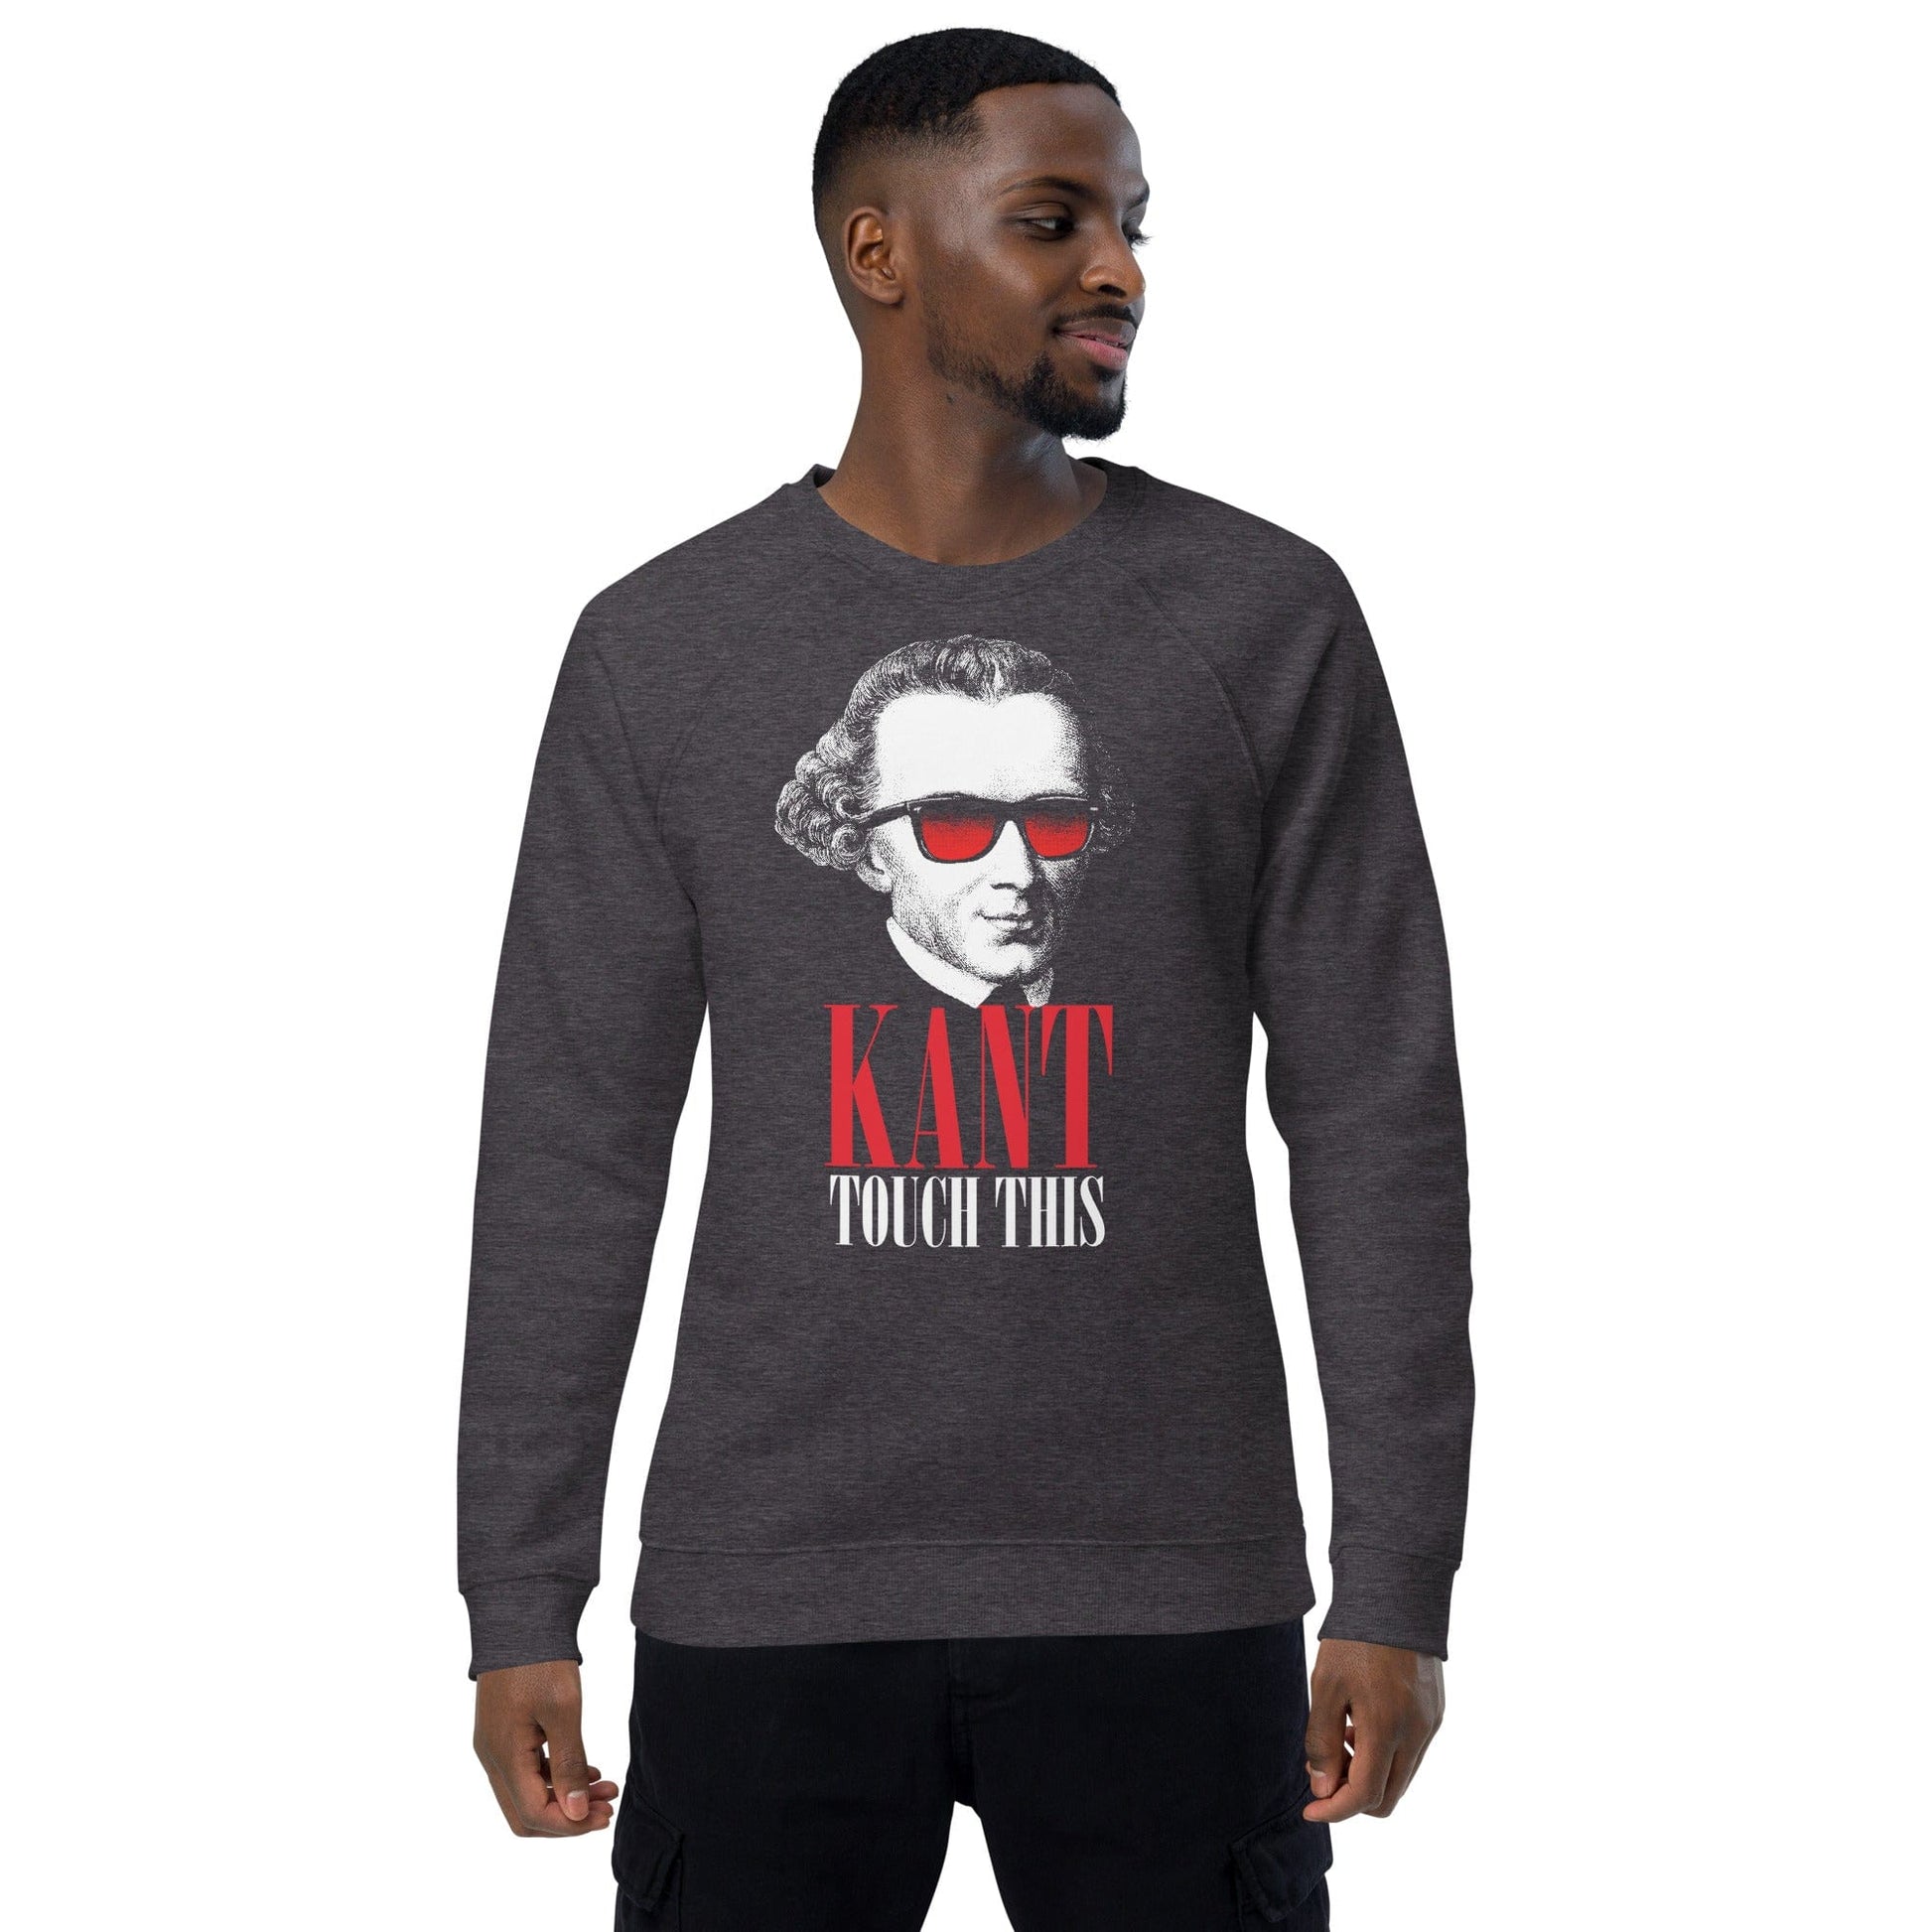 Kant touch this - Eco Sweatshirt